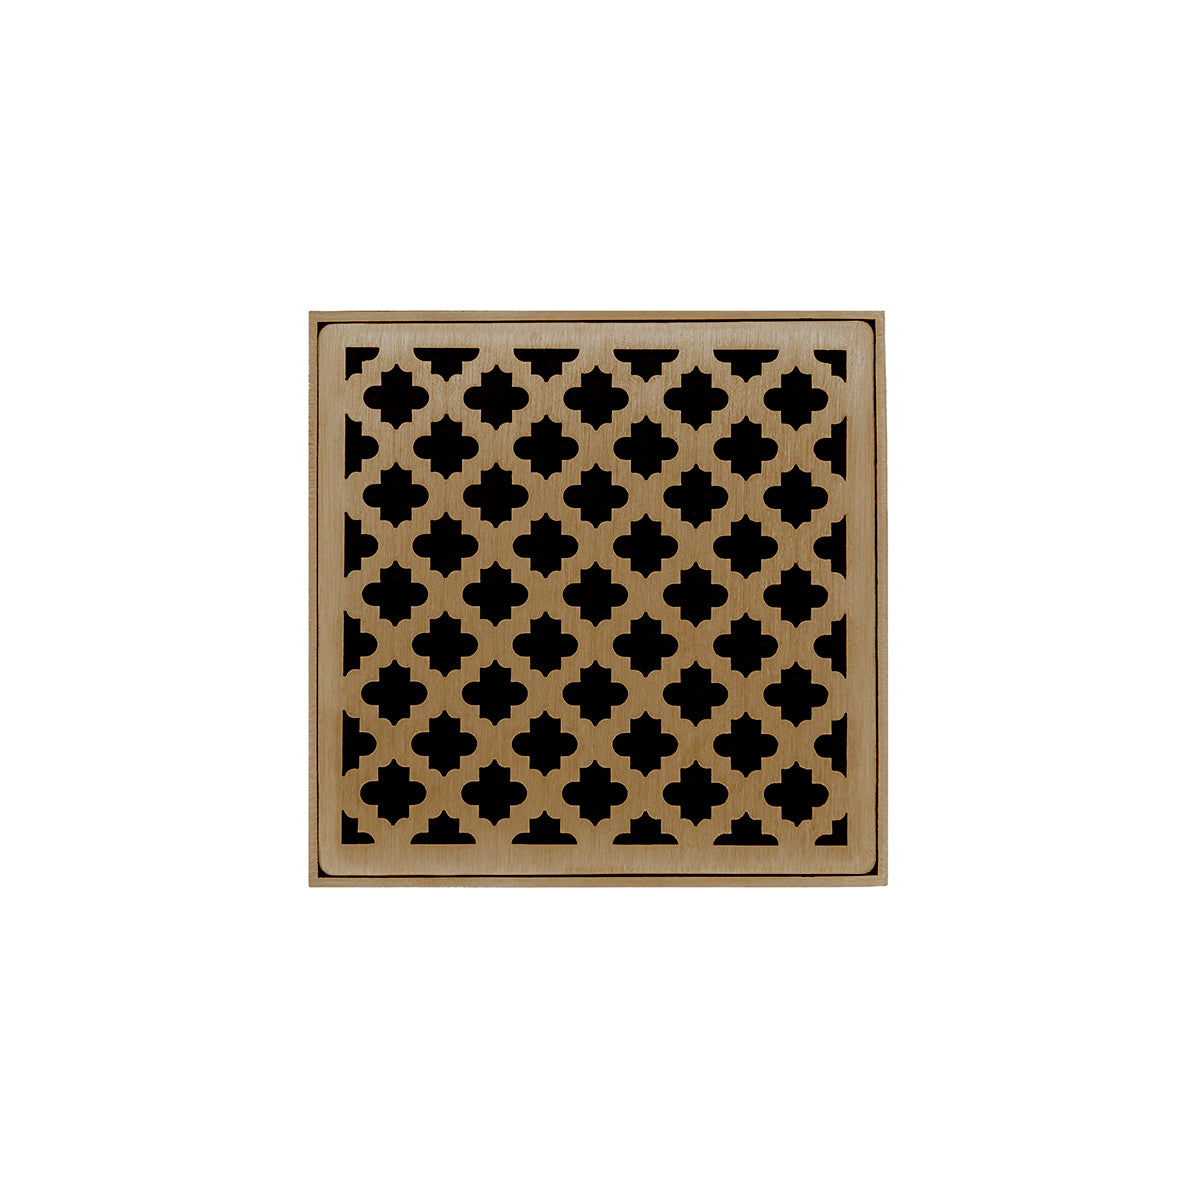 Infinity Drain 5" x 5" MD 5 Premium Center Drain Kit with Moor Pattern Decorative Plate with Cast Iron Drain Body for Hot Mop, 2" Outlet